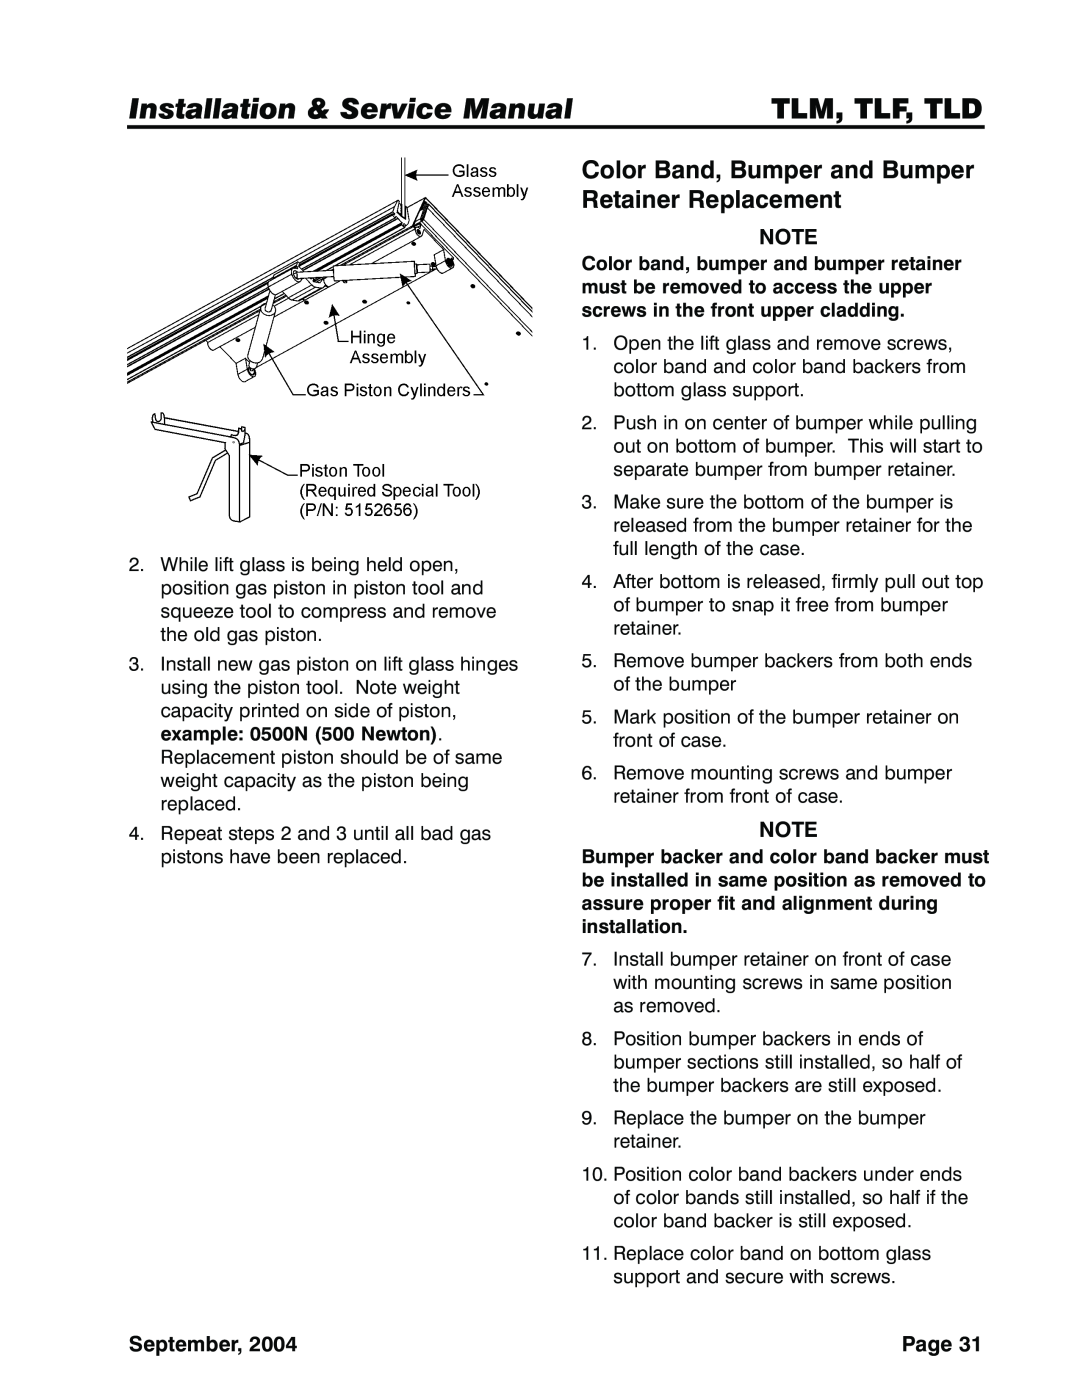 Tyler Refrigeration TLD, TLF, TLM service manual Tlm, Tlf, Tld, Replace the bumper on the bumper retainer 